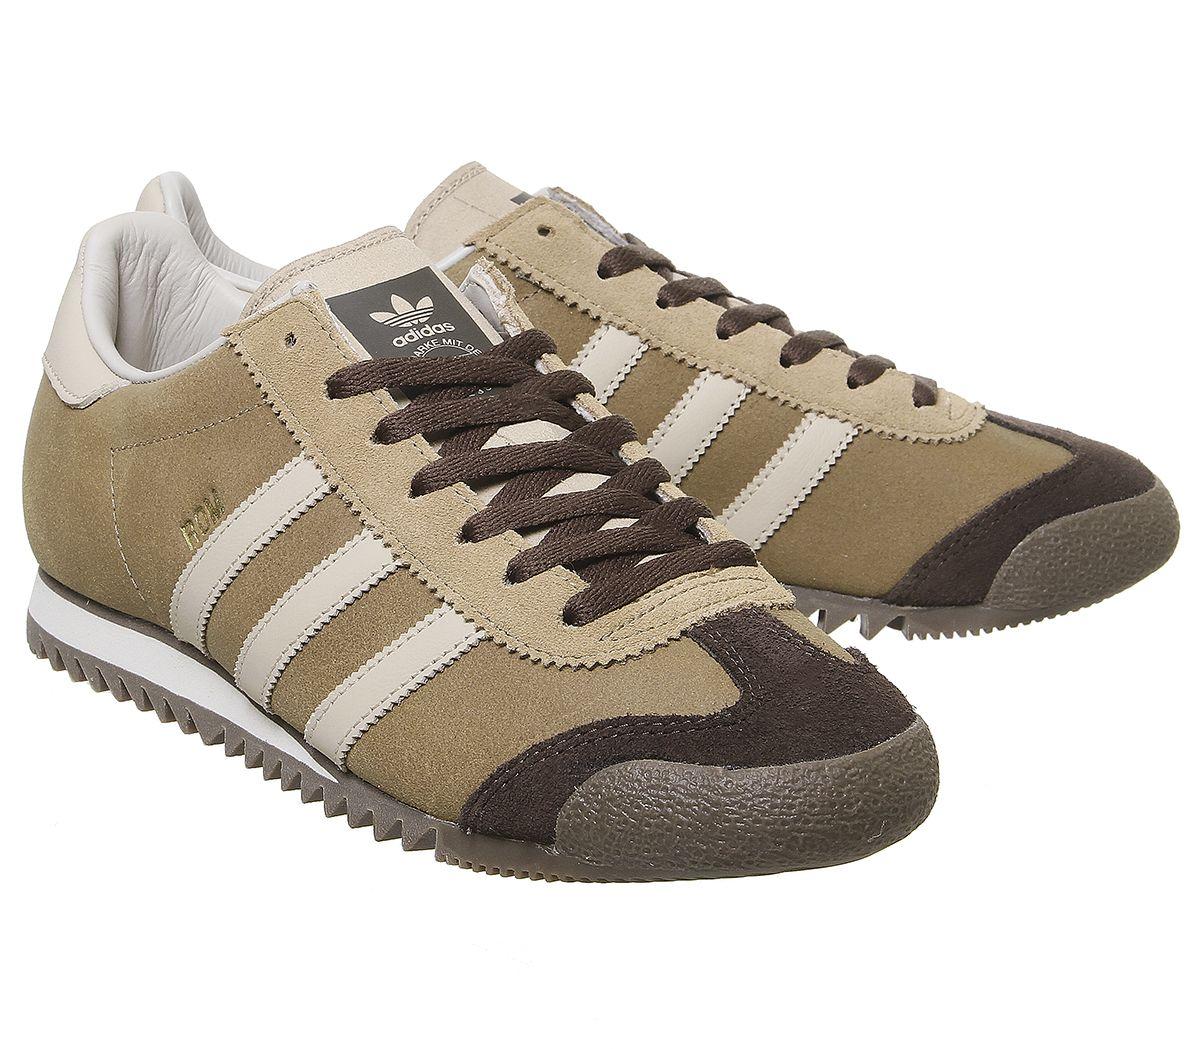 adidas rom brown leather